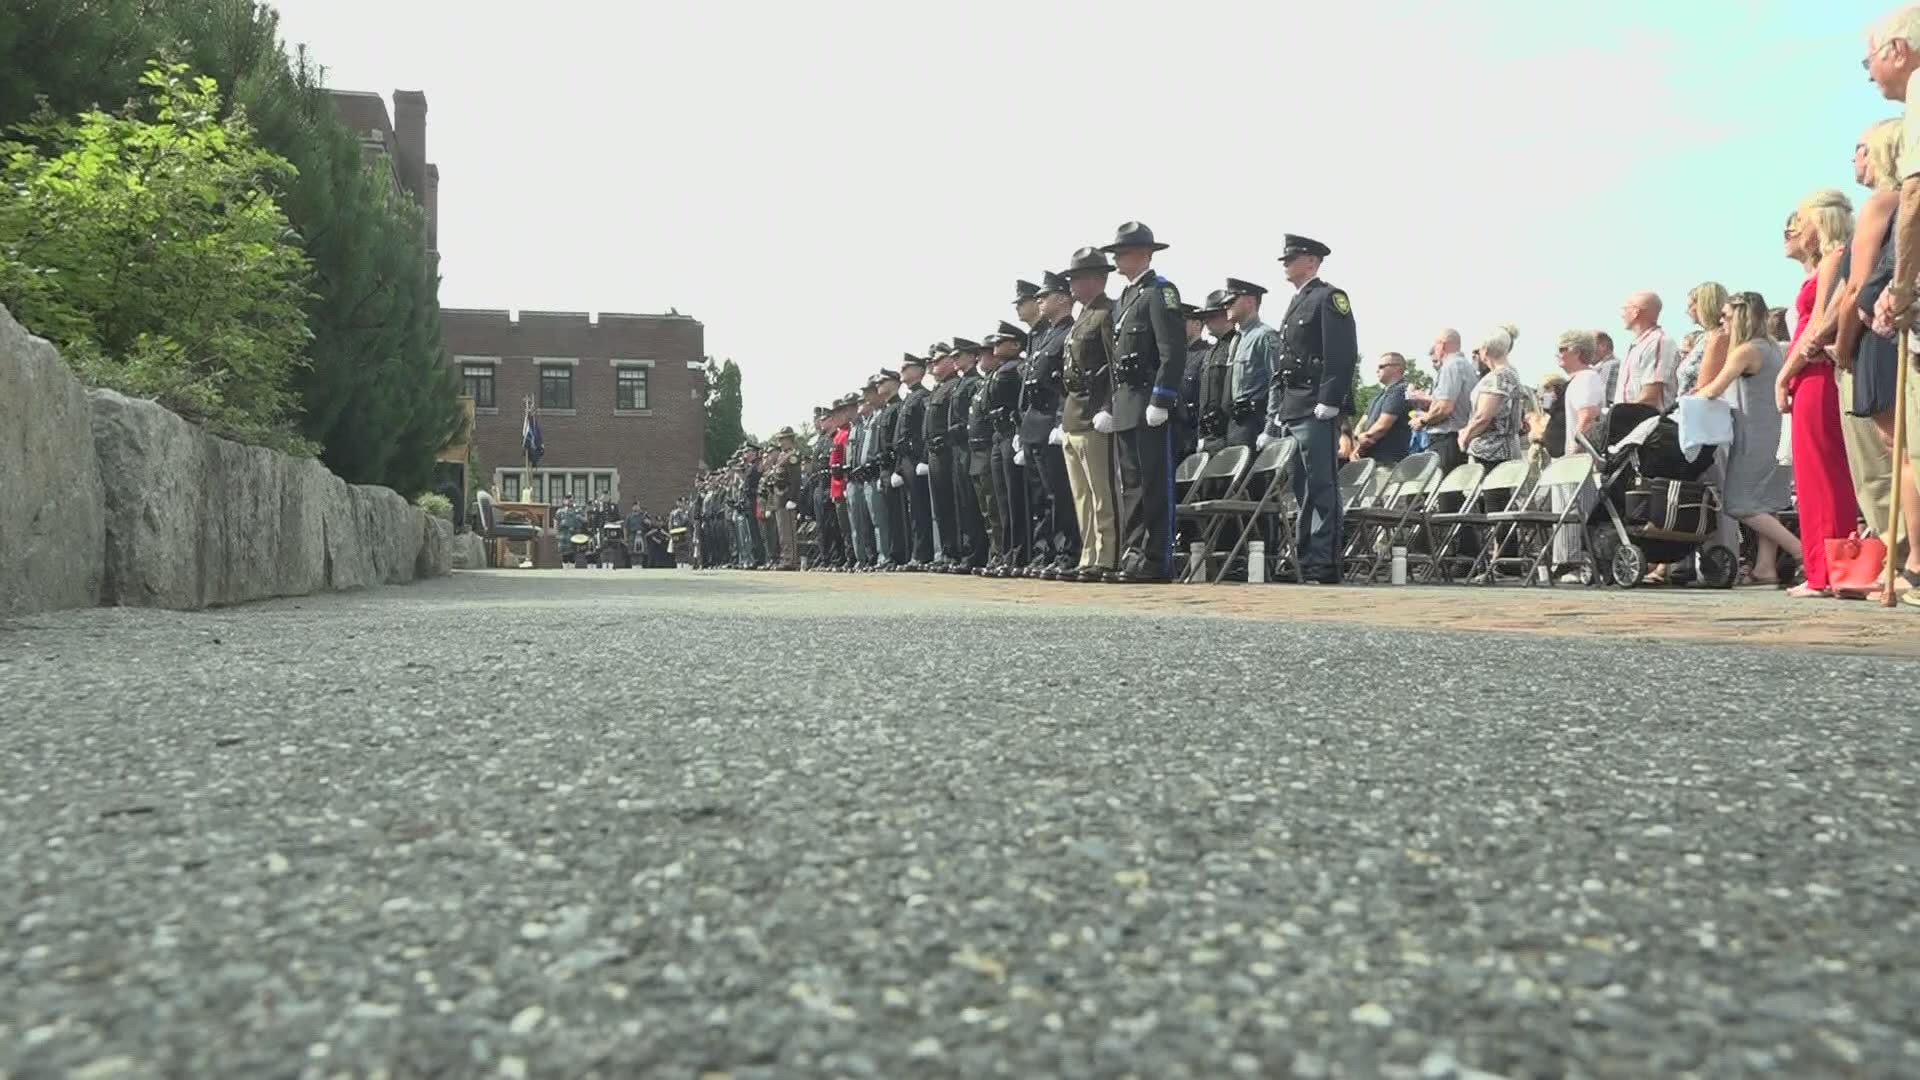 Cadets graduated from the basic training program at the Maine Criminal Justice Academy with the largest graduating class and with the largest number of female grads.